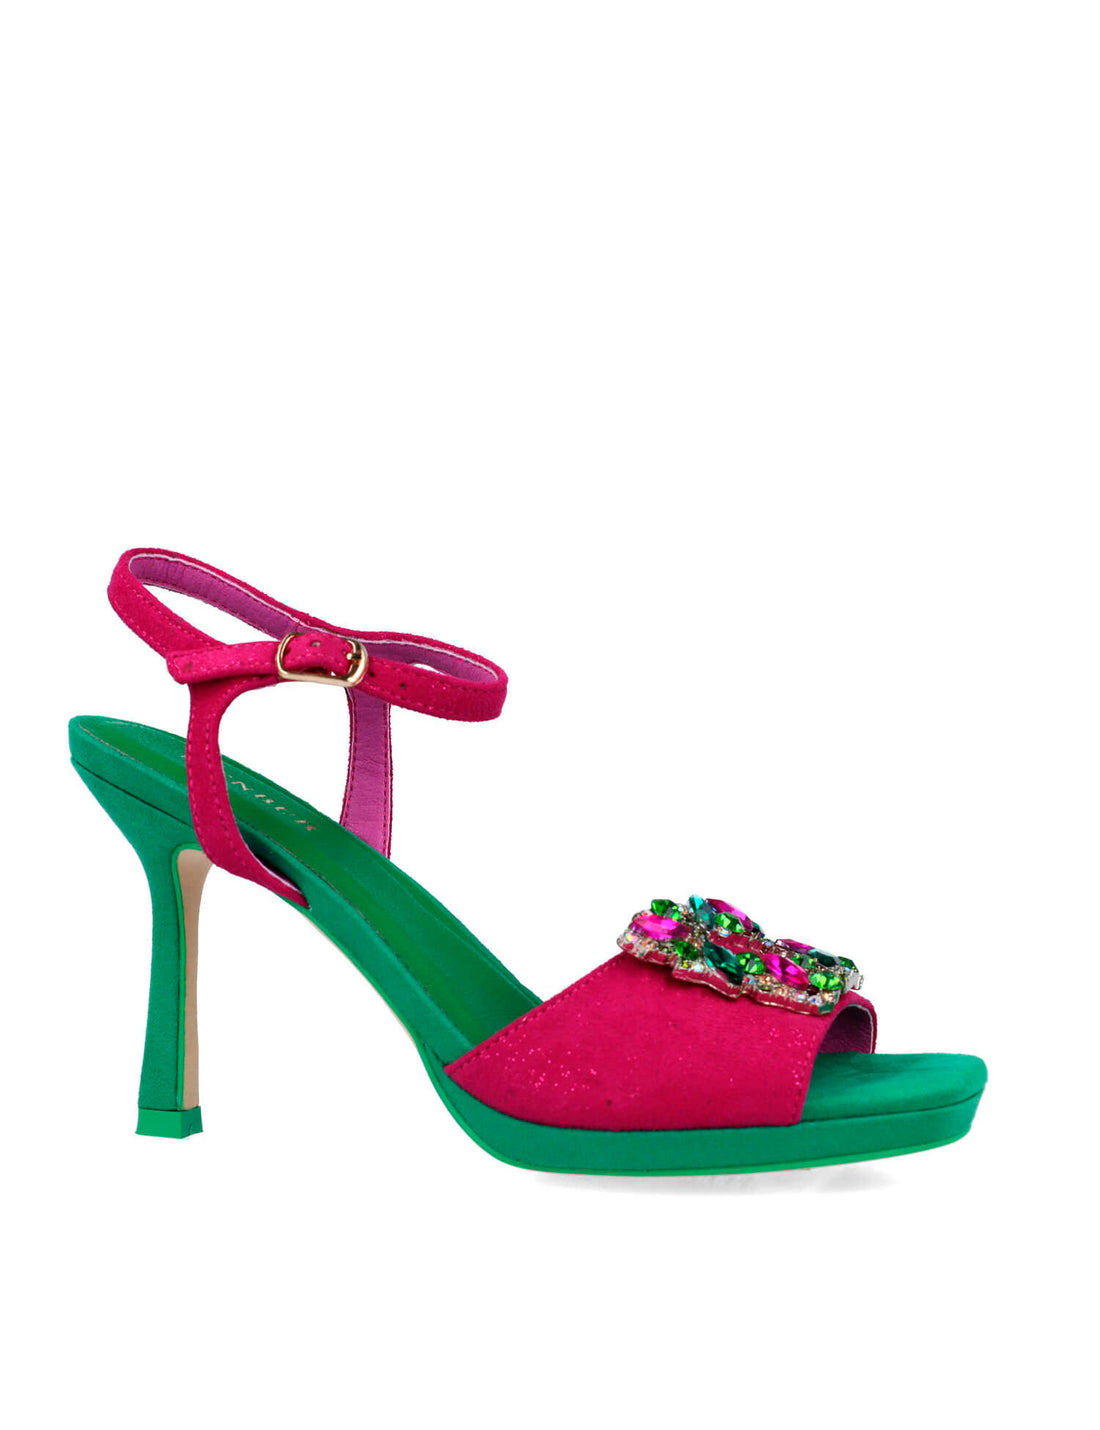 Multi-Color High-Heel Sandals With Embellishment_25259_18_02